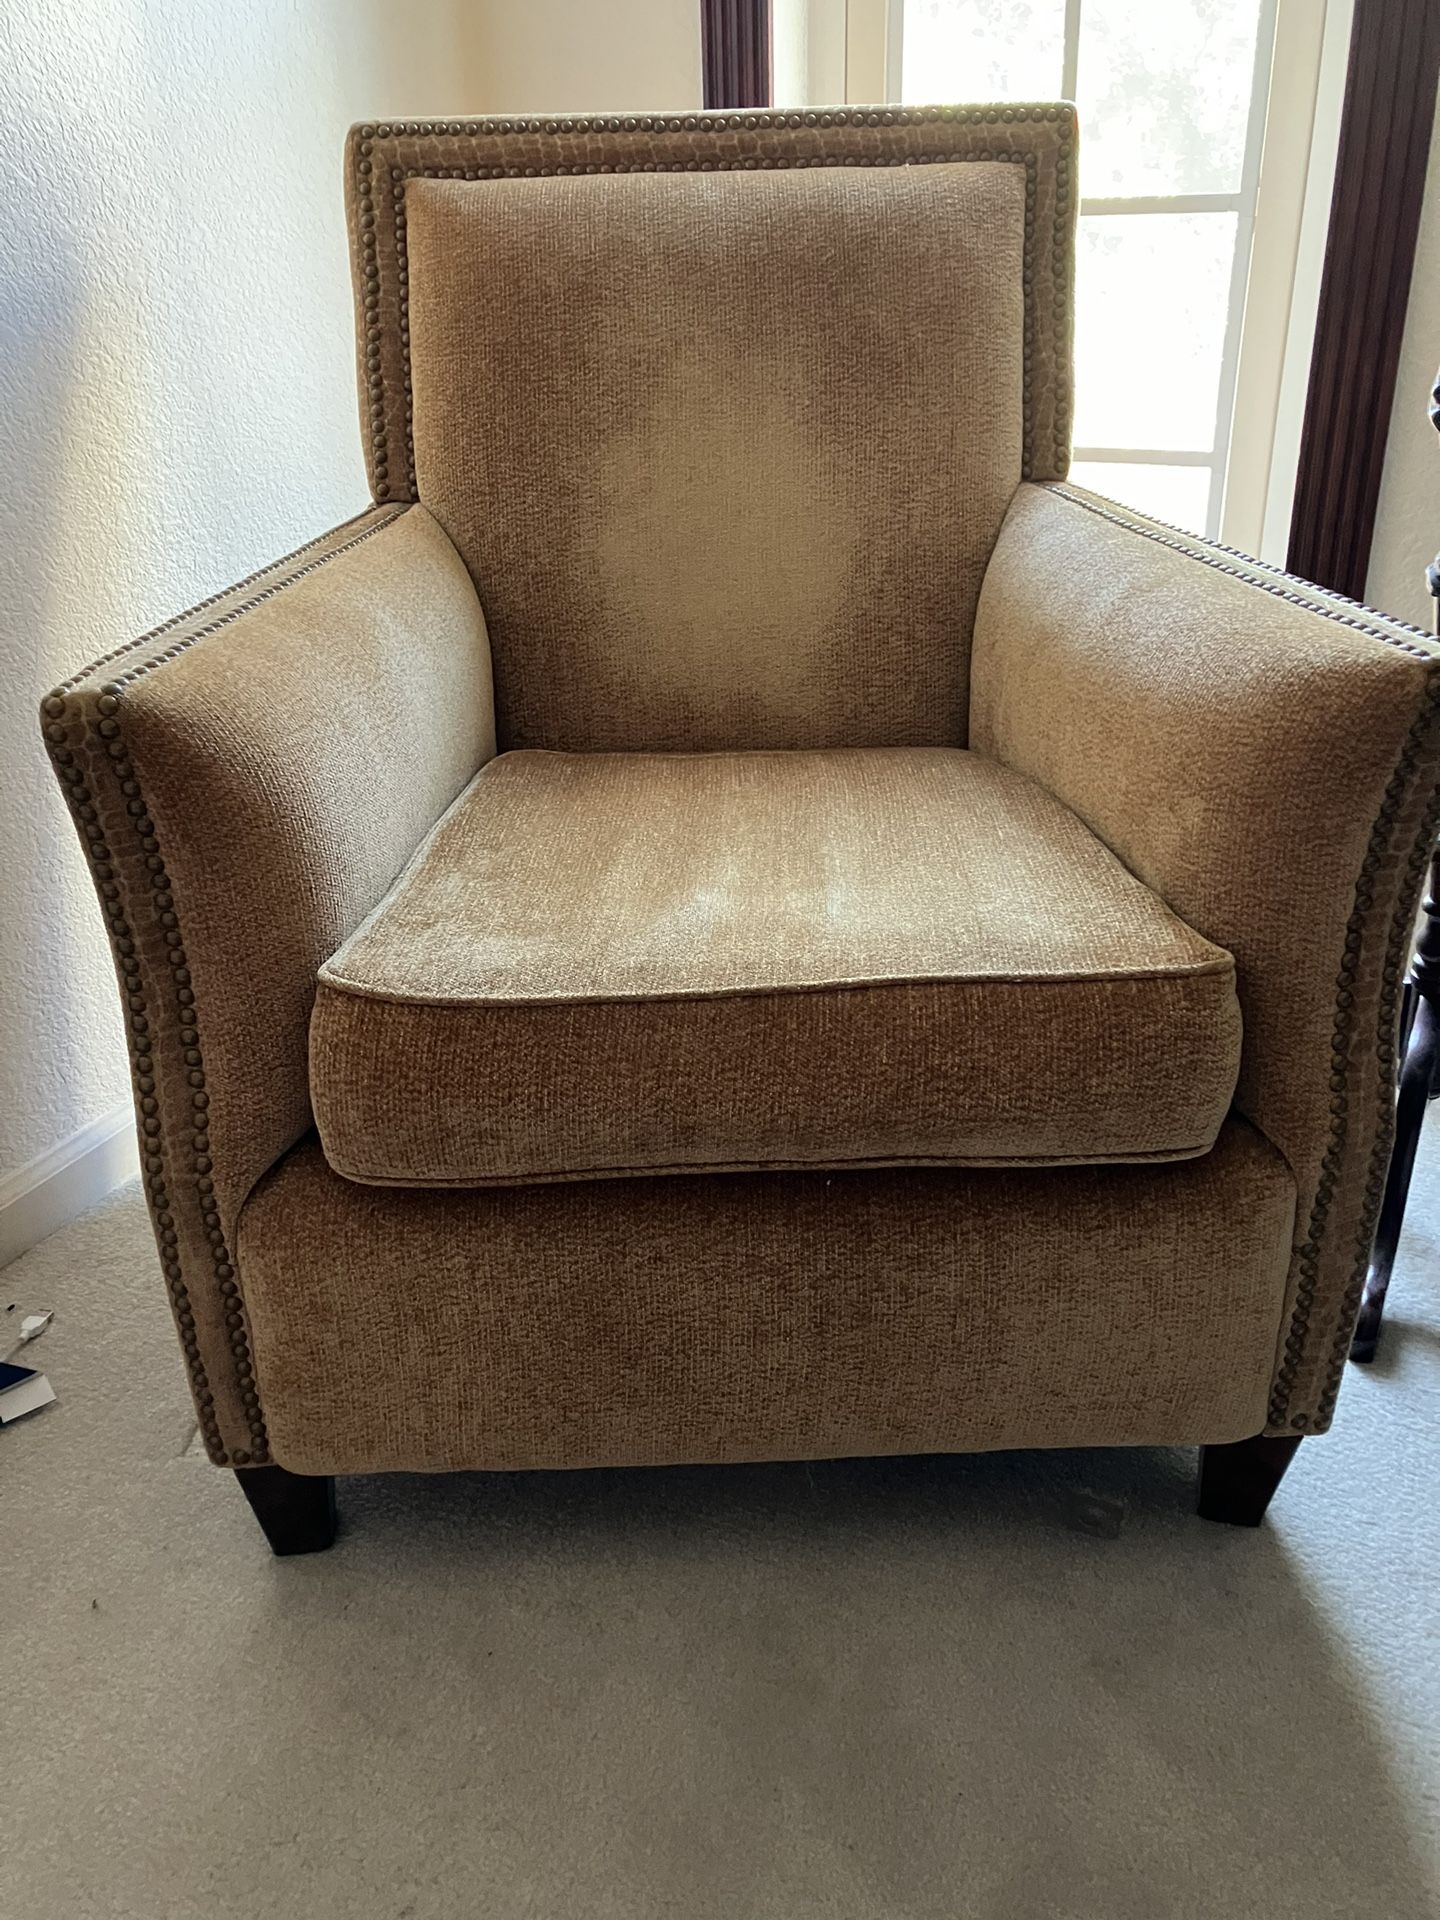 Pair of Gold Chairs with Nailhead Design